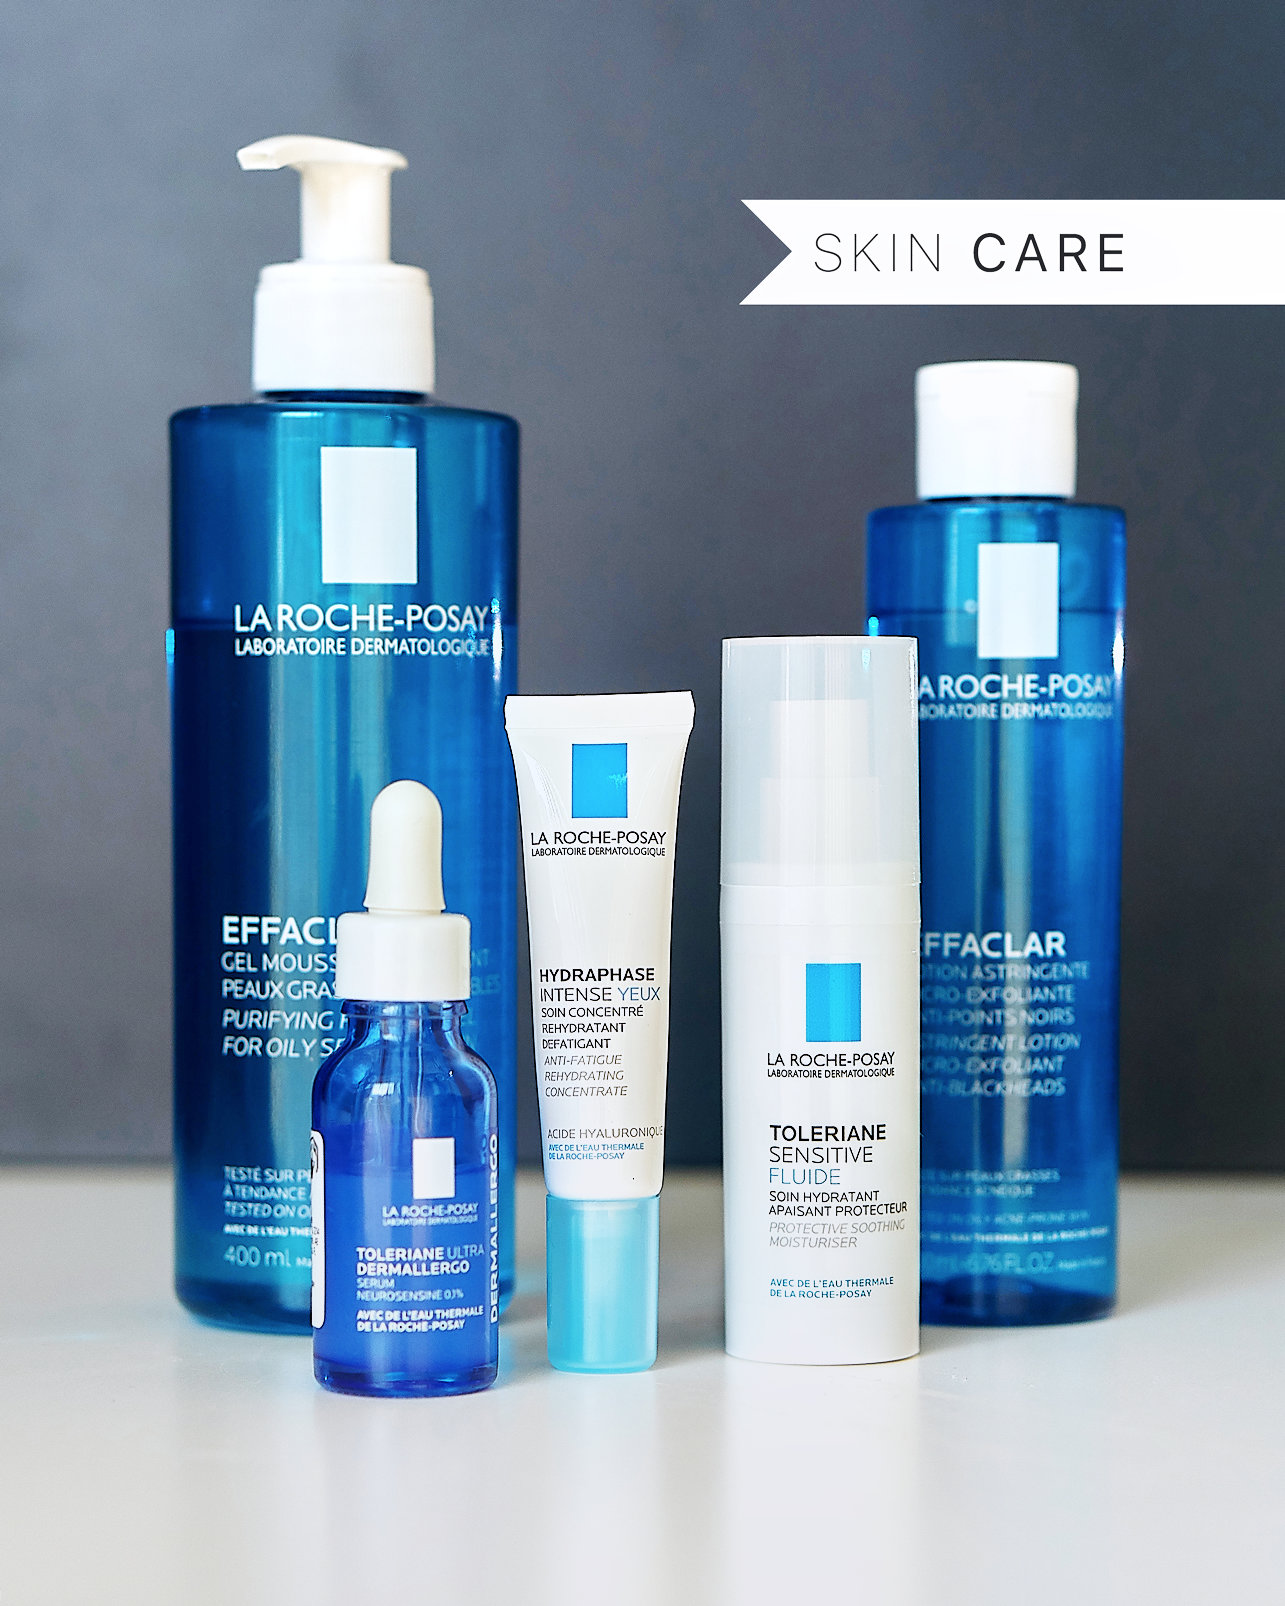 Preview image for post: Four simple steps for everyday skin care